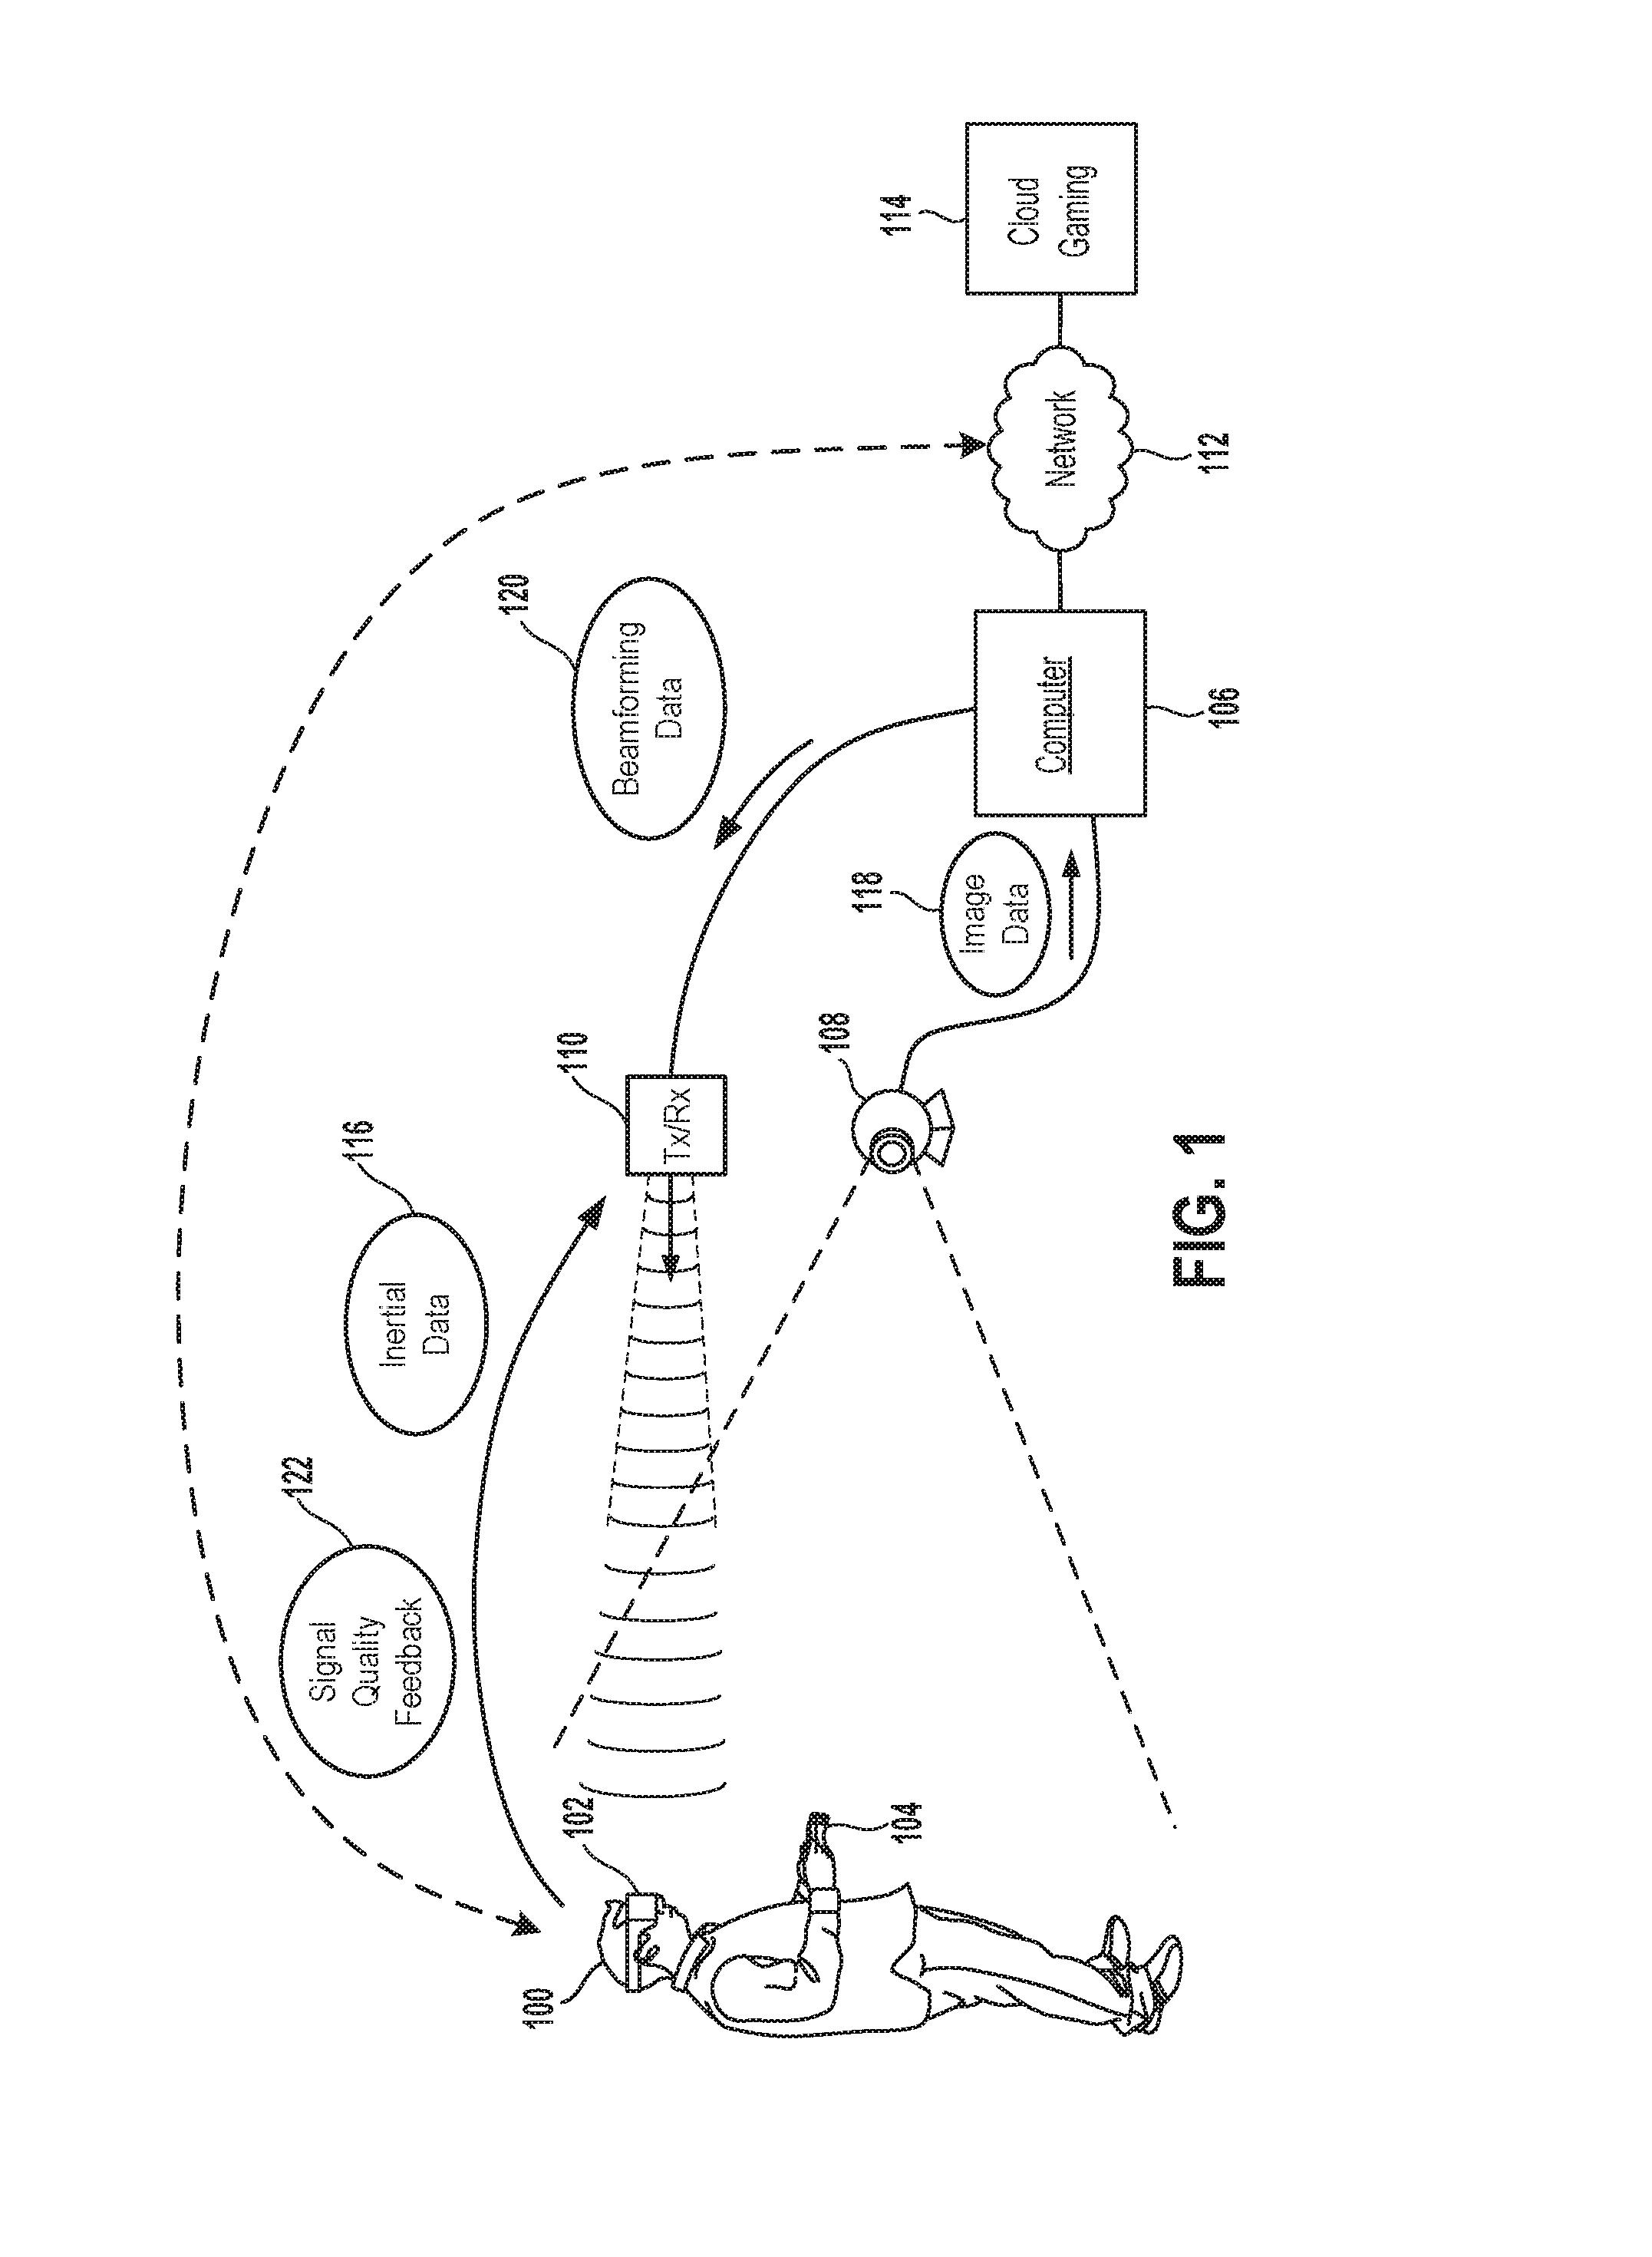 Wireless Head Mounted Display with Differential Rendering and Sound Localization